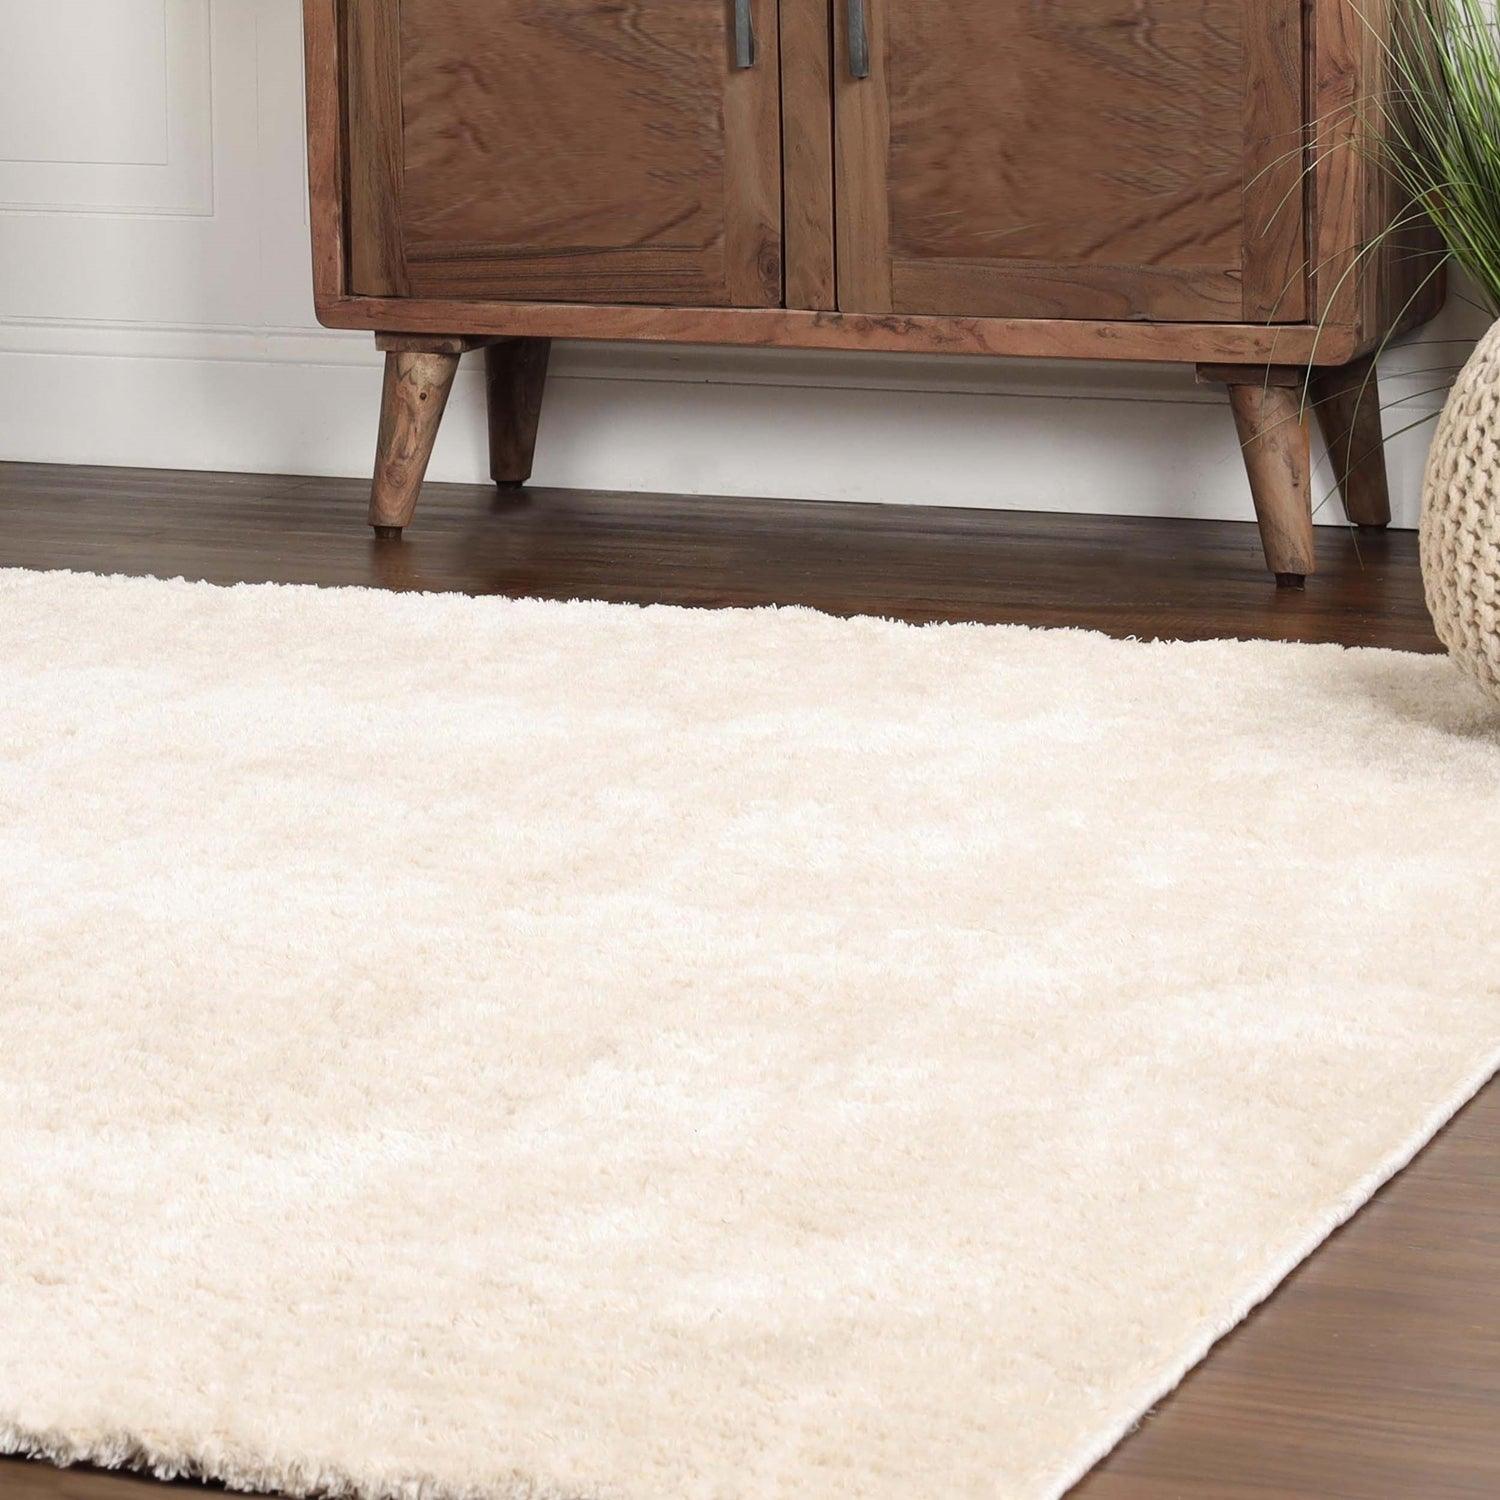  Superior Fuzzy Plush Non-Skid Soft Solid Shag Indoor Area Rug or Runner - Ivory